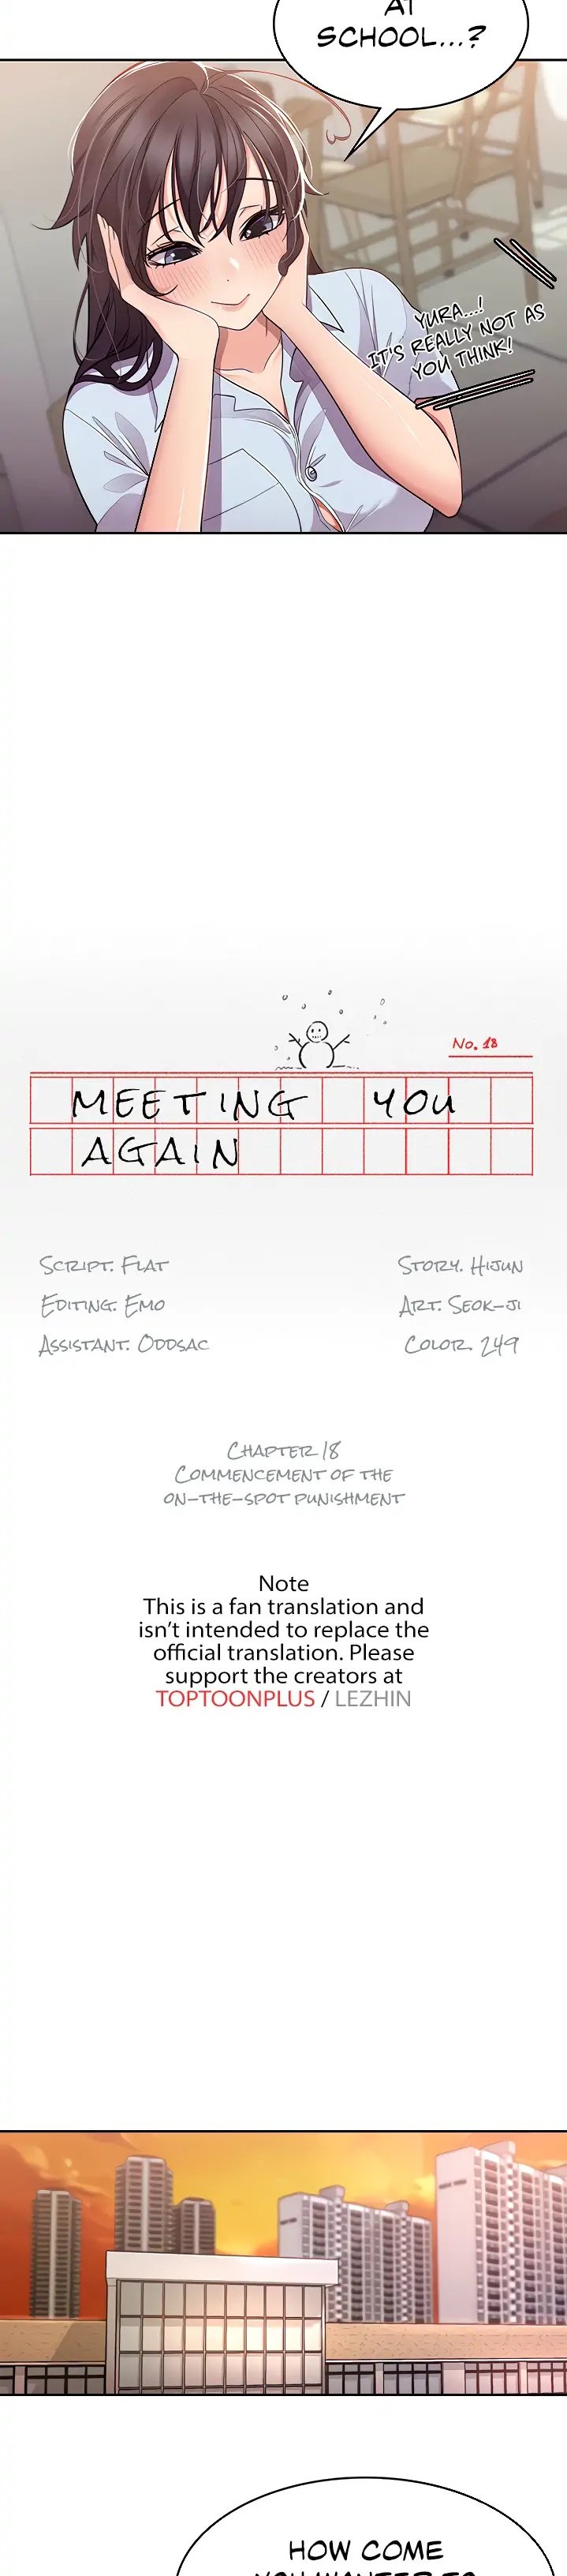 Meeting you again - Chapter 18 Page 8